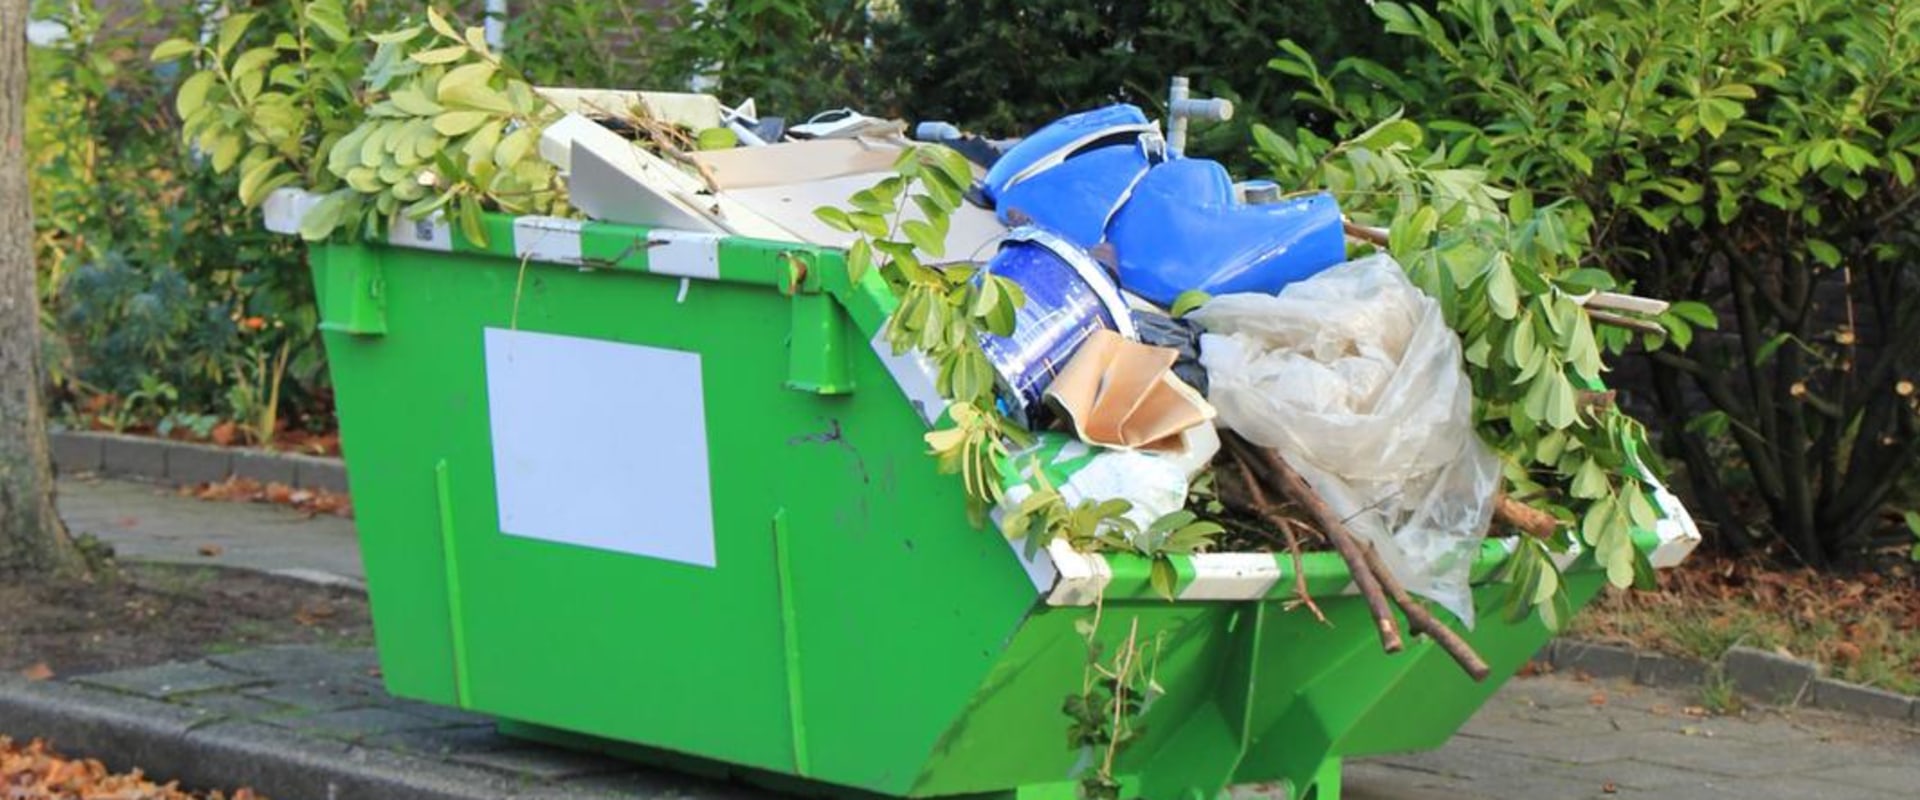 How Dumpster Rentals Can Help With Outdoor Pest Control In Desoto, TX